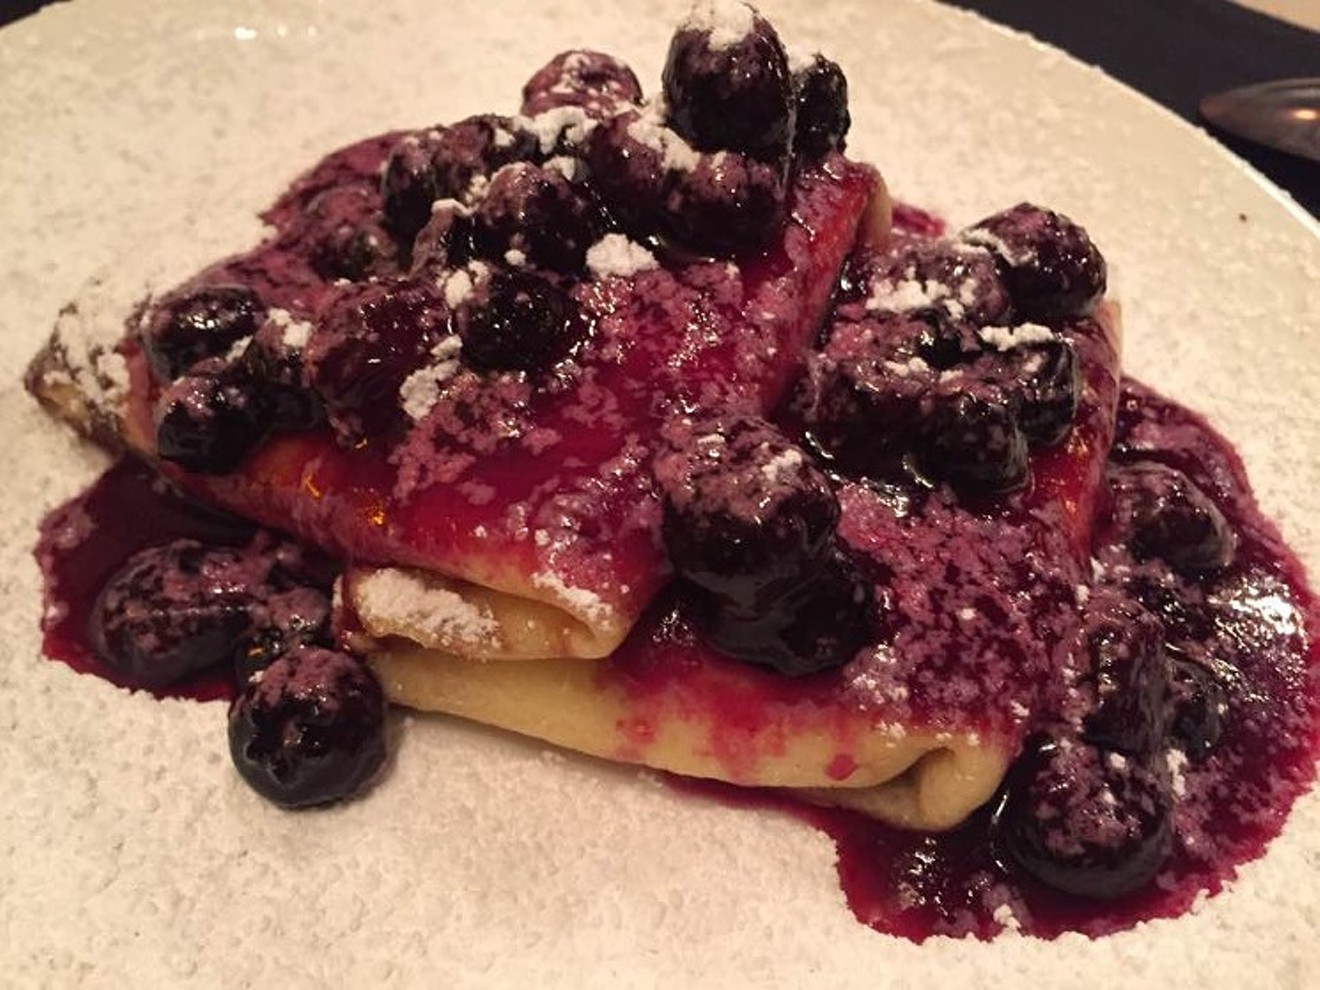 After a decade of serving brunch dishes like these blueberry blintzes, The Grape is giving up on brunch.